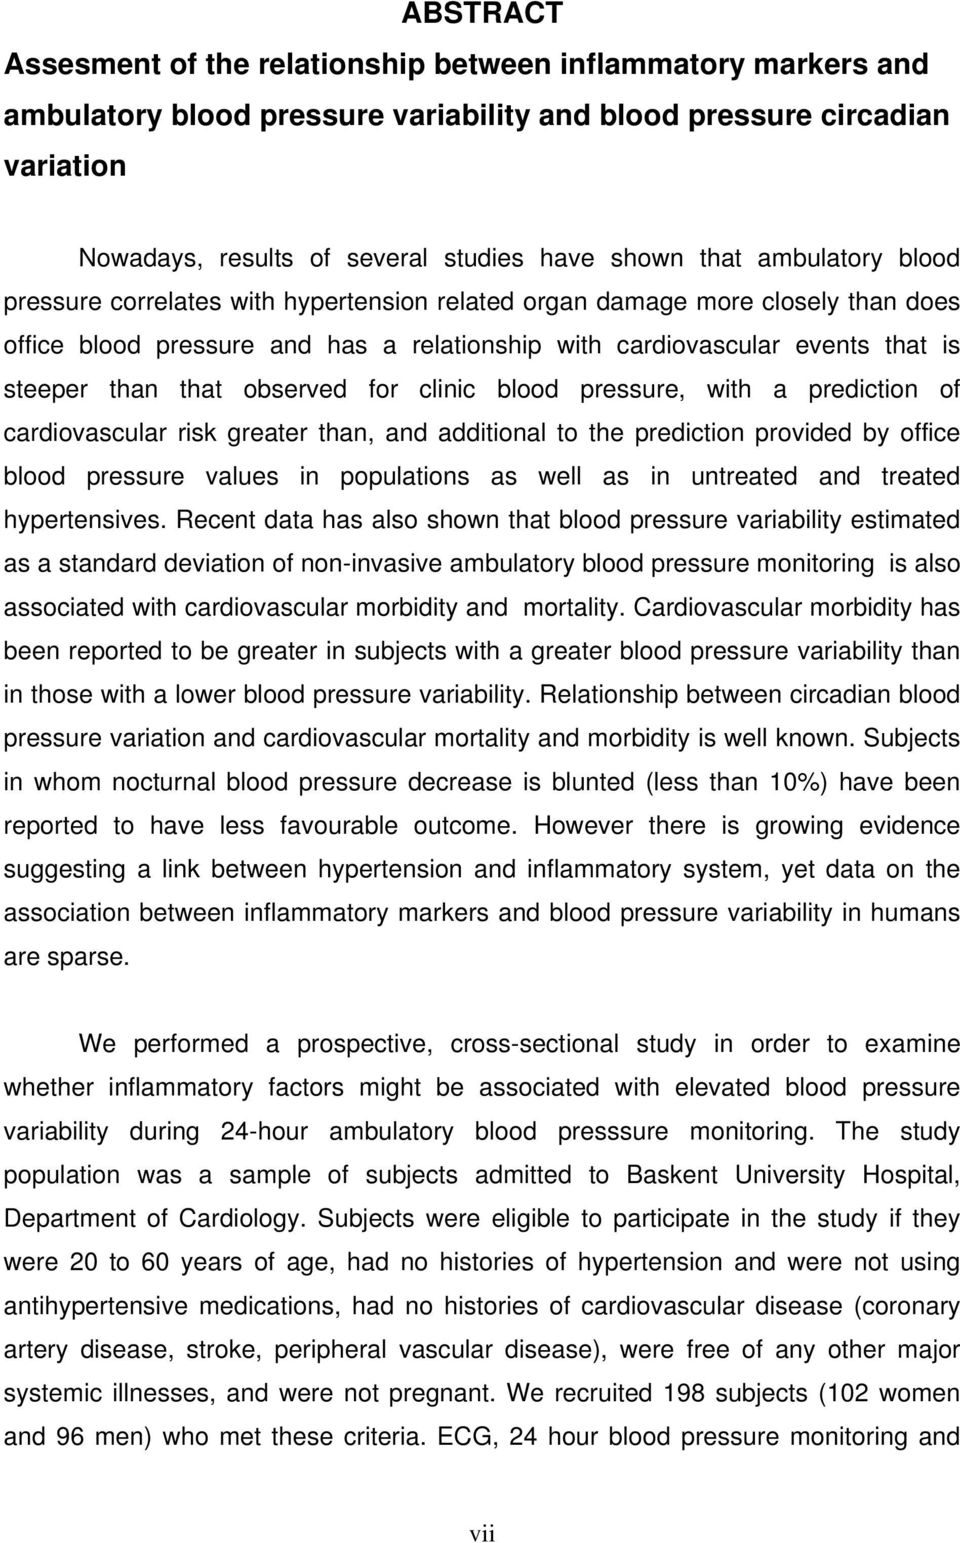 that observed for clinic blood pressure, with a prediction of cardiovascular risk greater than, and additional to the prediction provided by office blood pressure values in populations as well as in